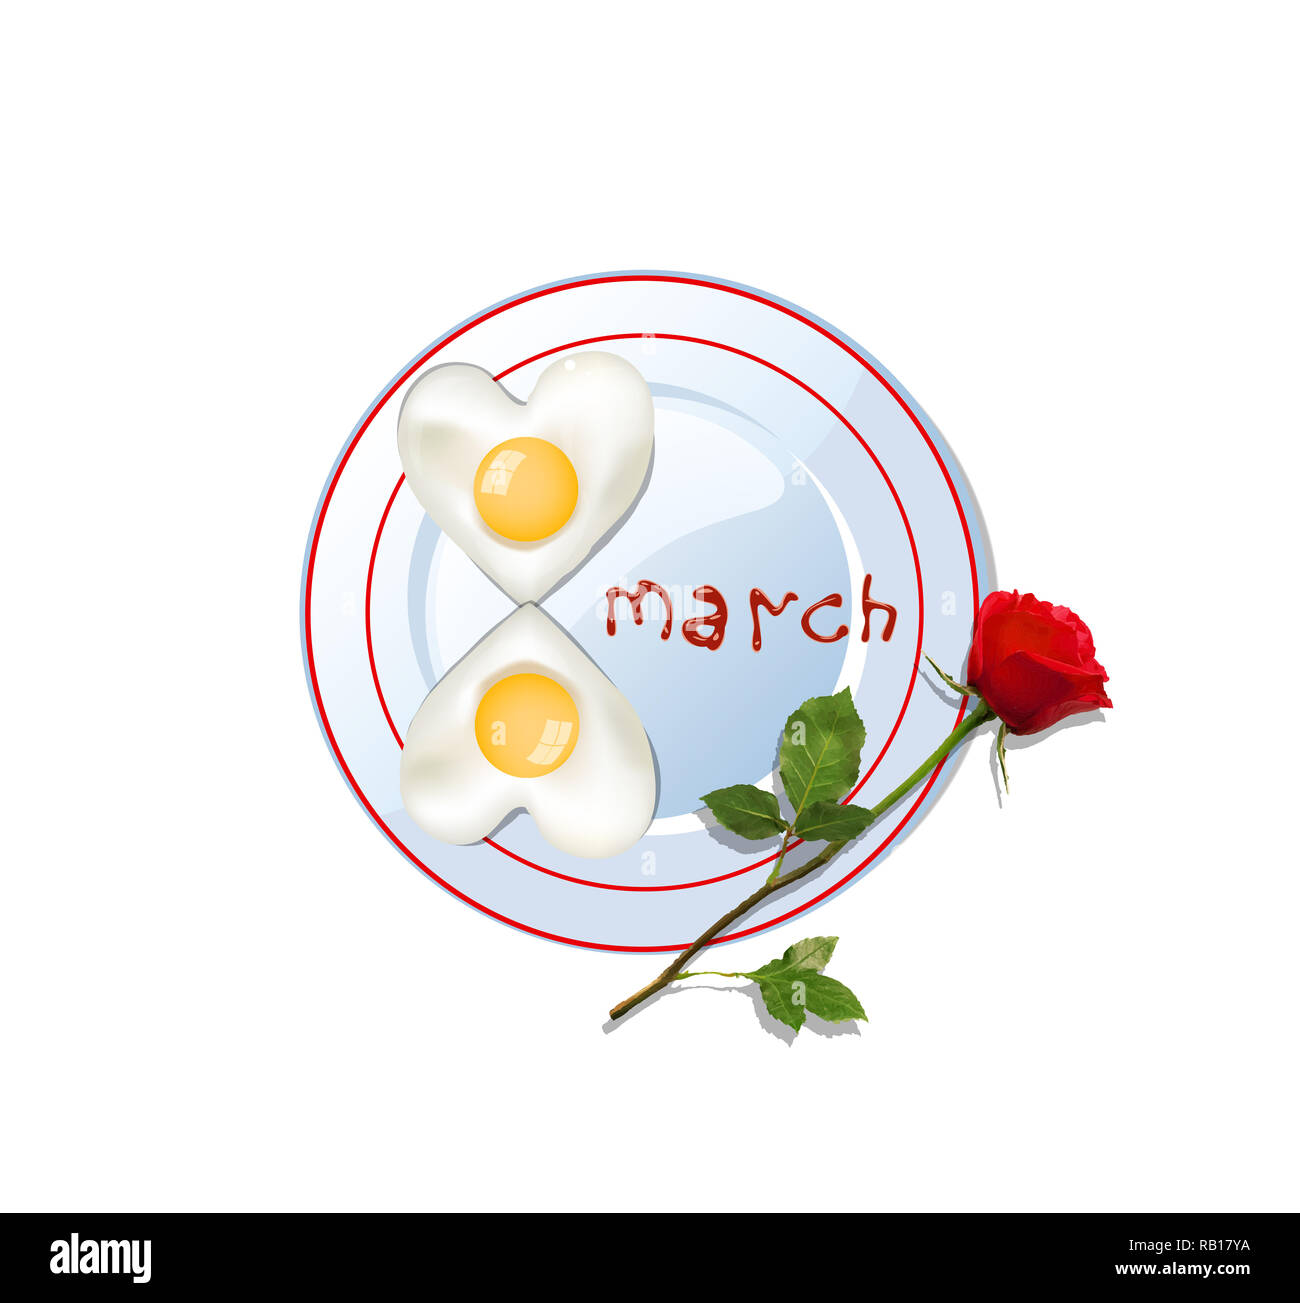 Happy women's day   illustration, clip art with number eight shaped heart omelette on plate with ketchup lettering and red rose flower isolated on whi Stock Photo